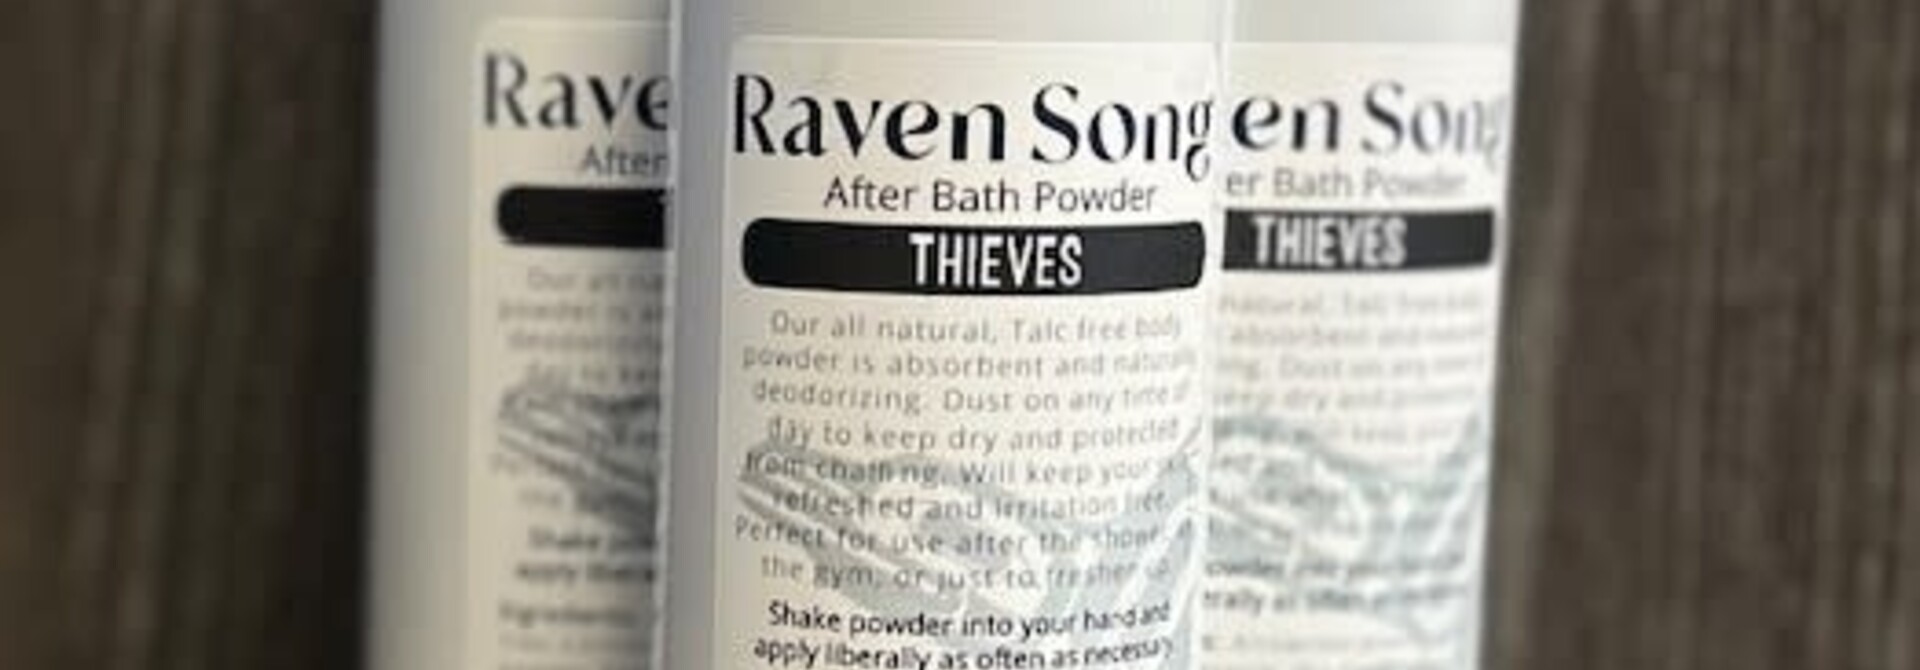 Thieves Body Powder by Raven Song